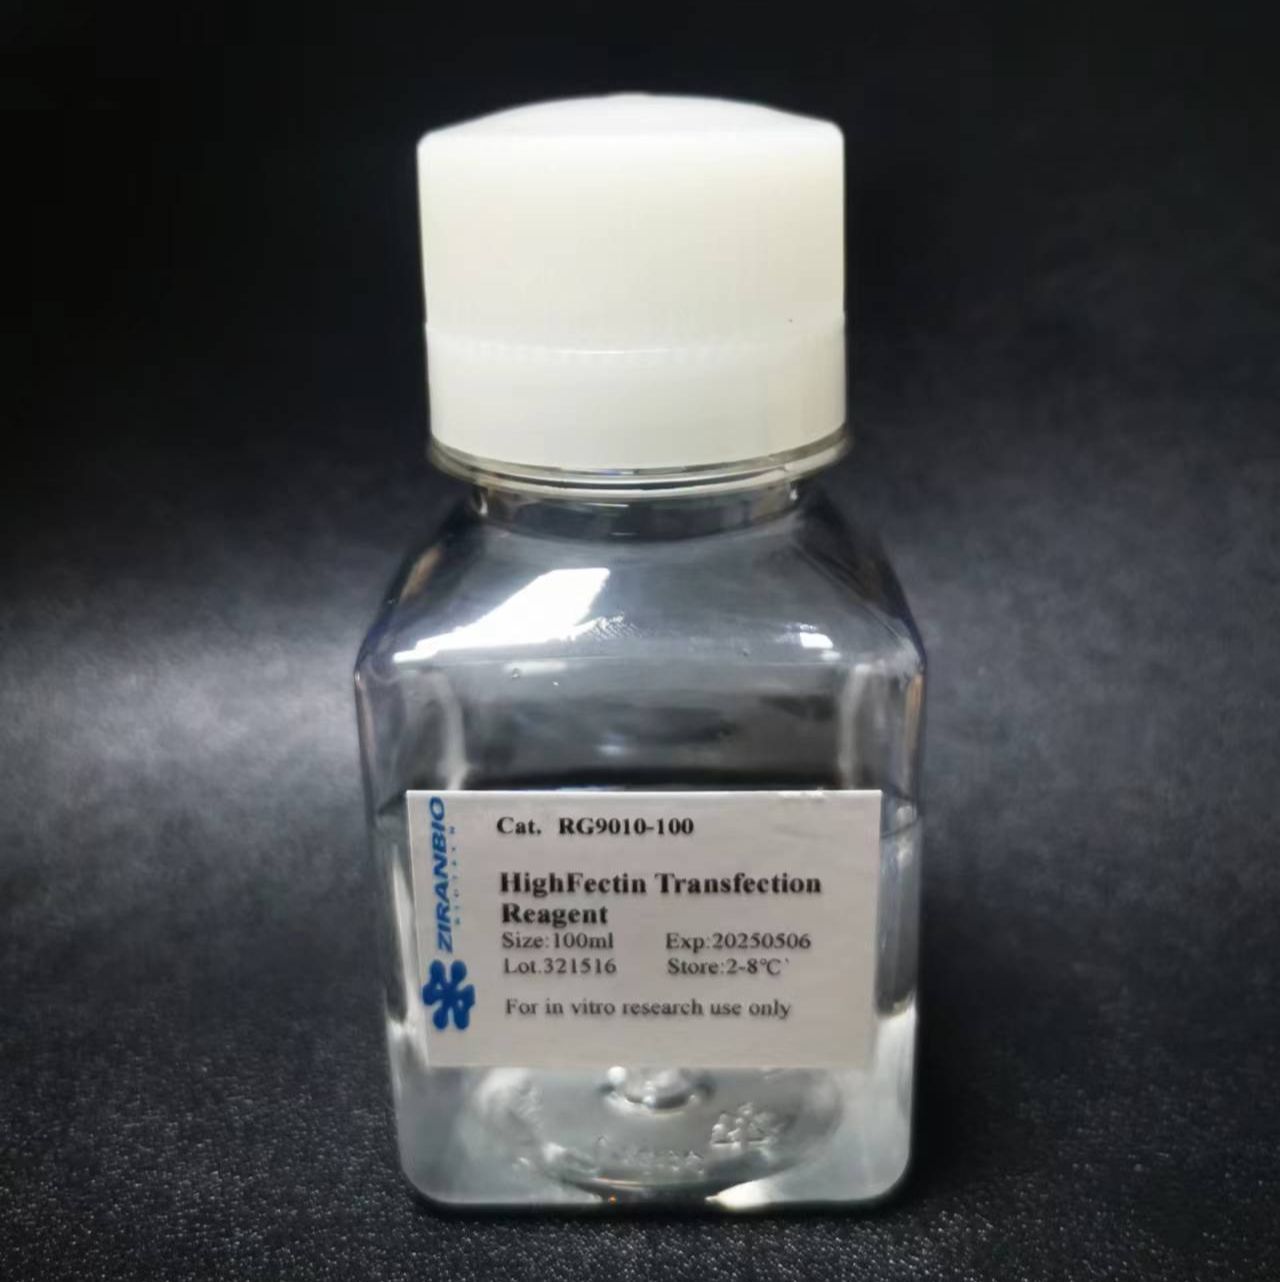 HighFectin Transfection Reagent